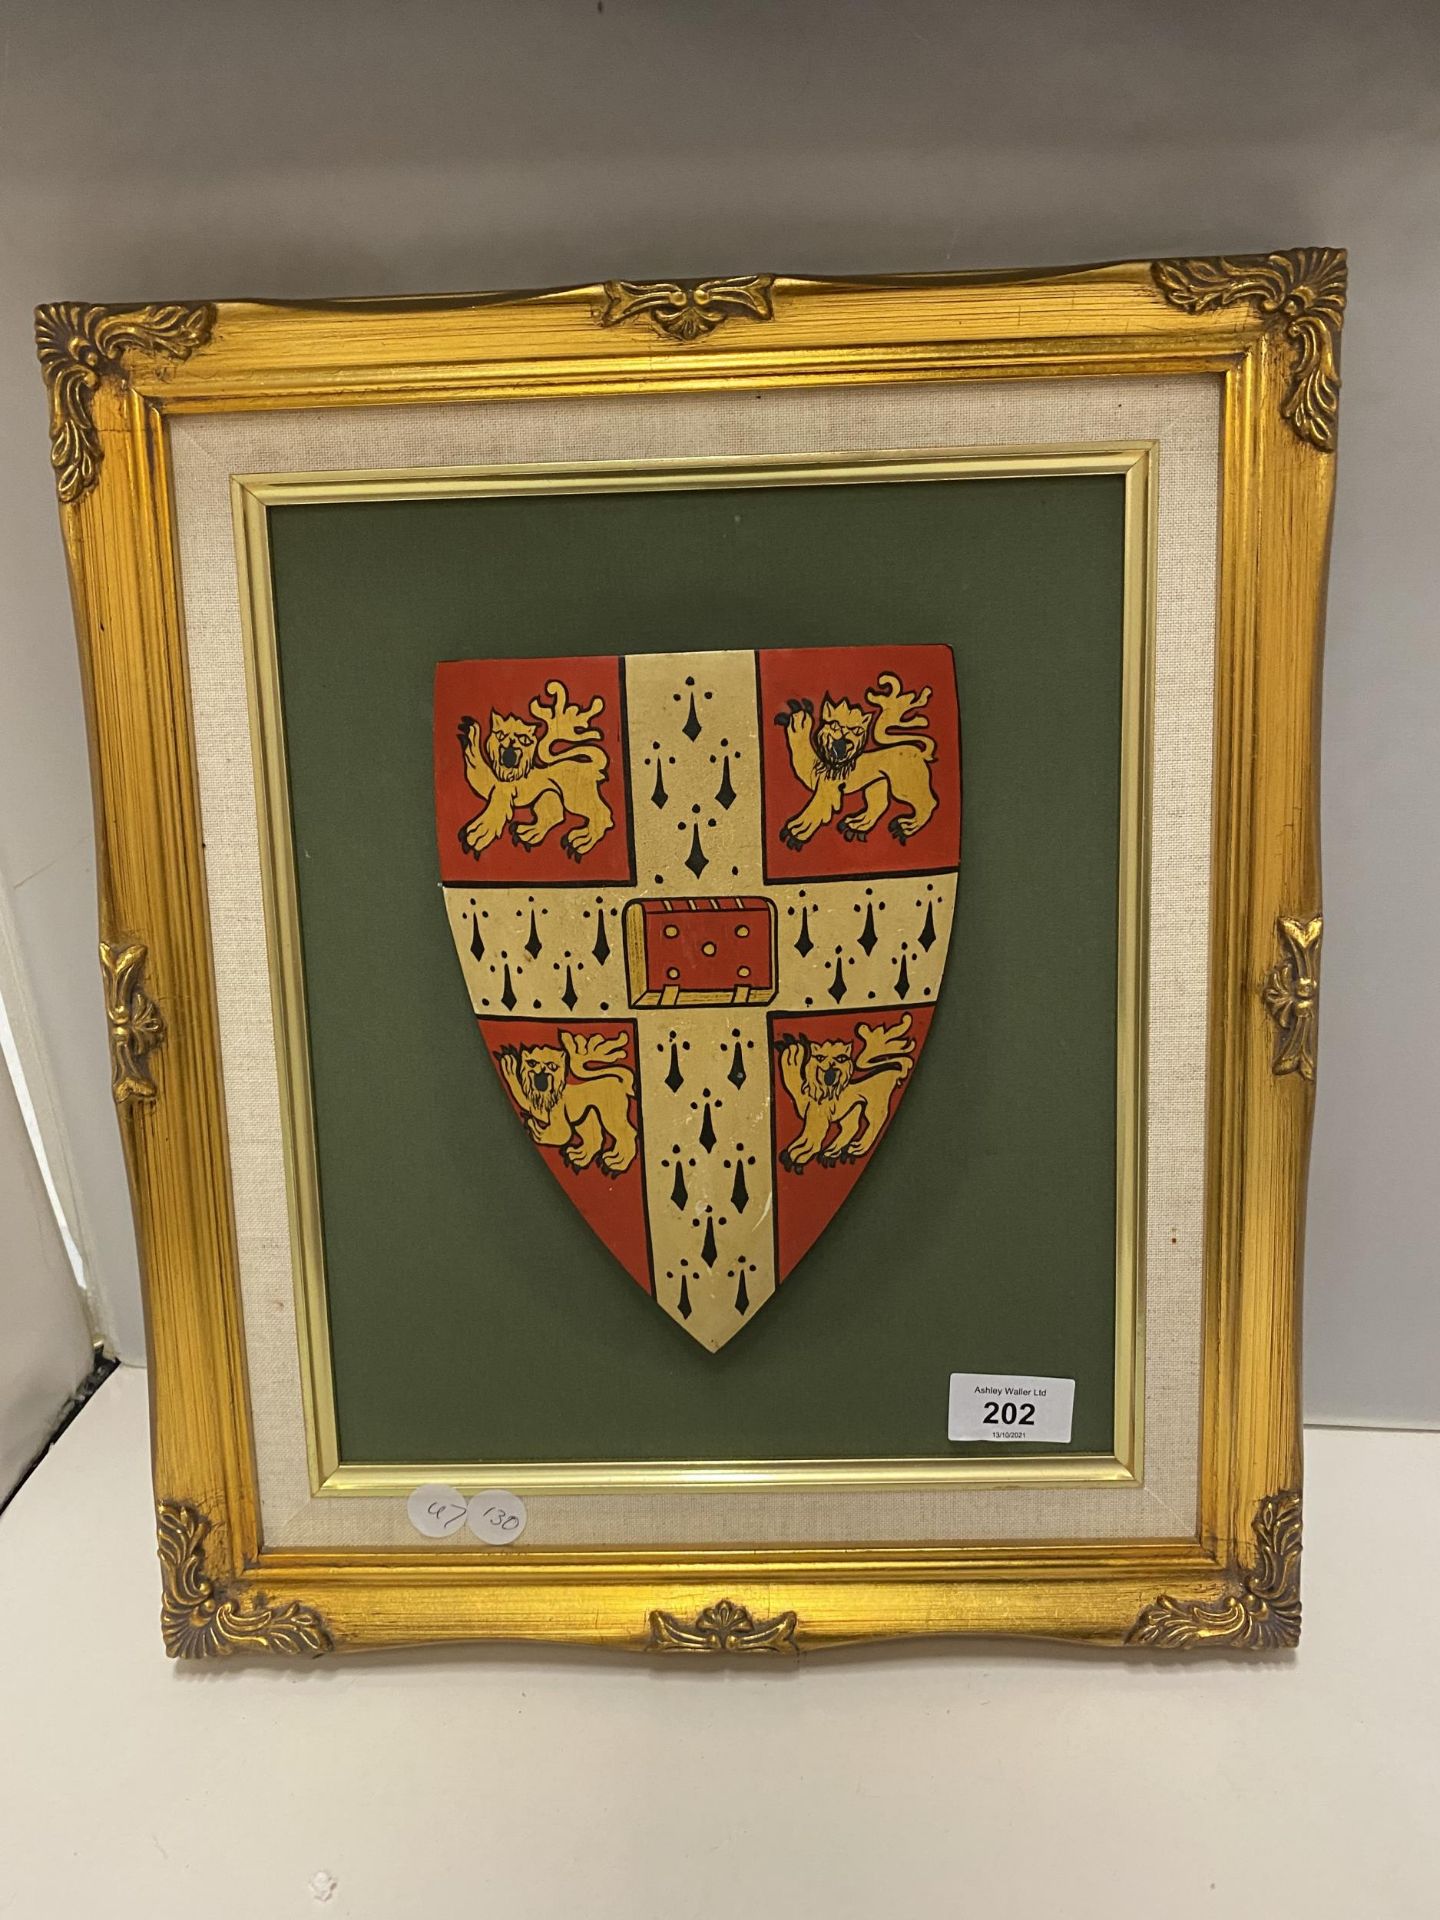 A FRAMED HERALDIC COAT OF ARMS